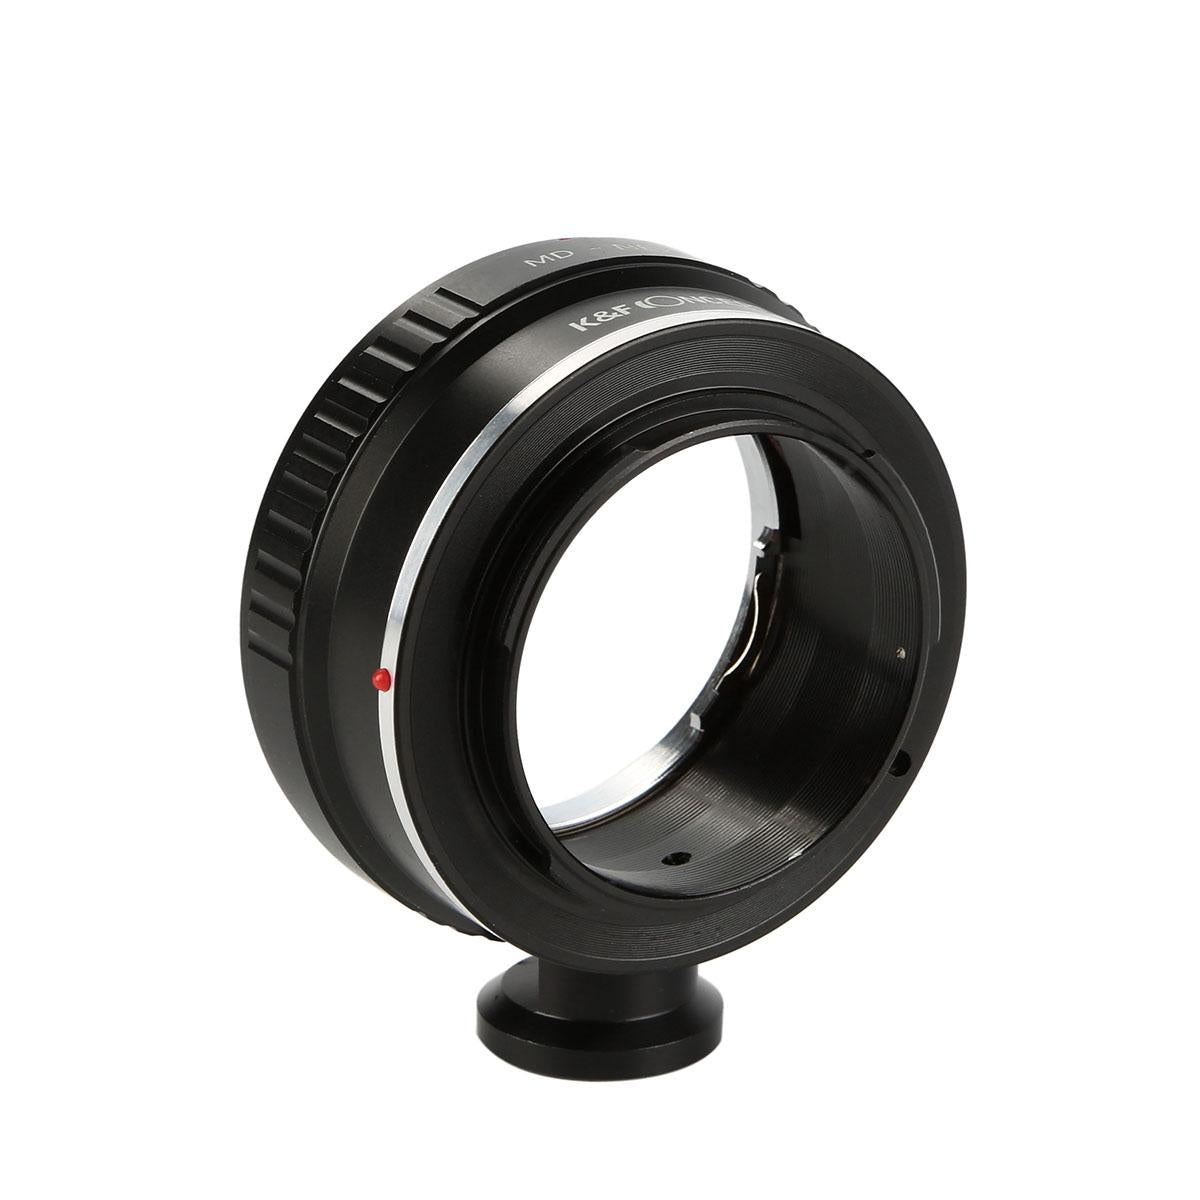 Image of K&F Concept Minolta MD Lenses to Sony E Mount Camera Adapter with Tripod Mount